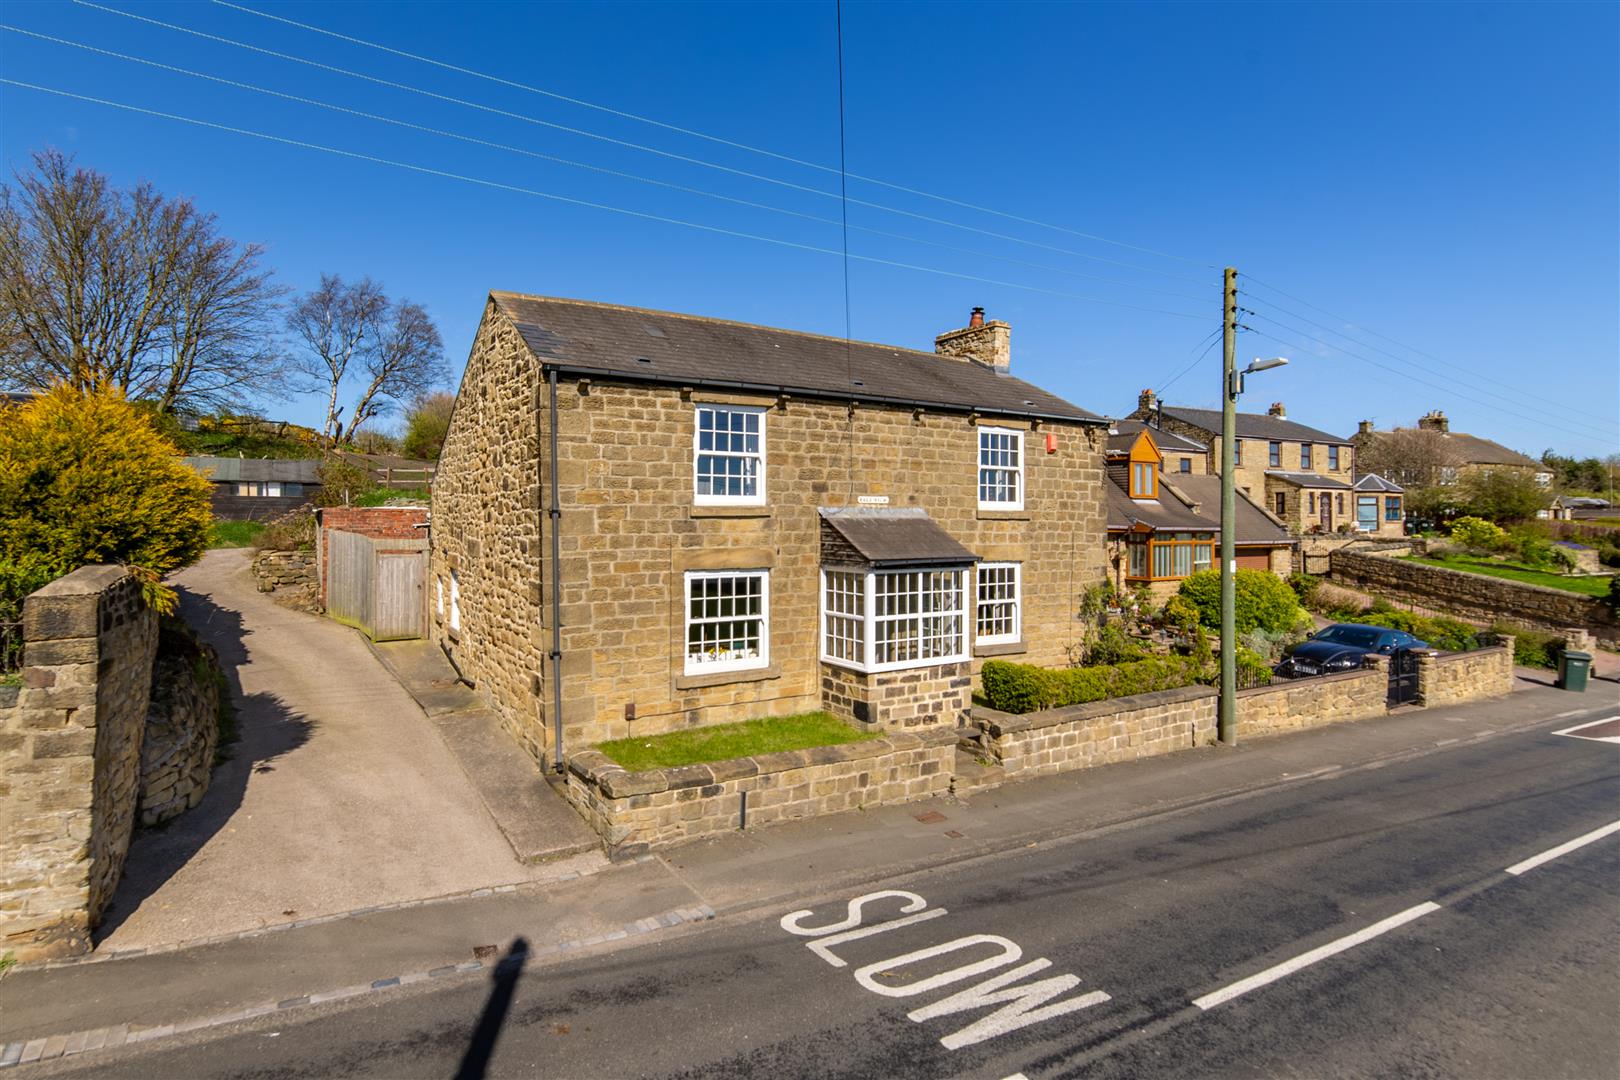 3 bed detached house for sale in Rockcliffe Way, Eighton Banks - Property Image 1